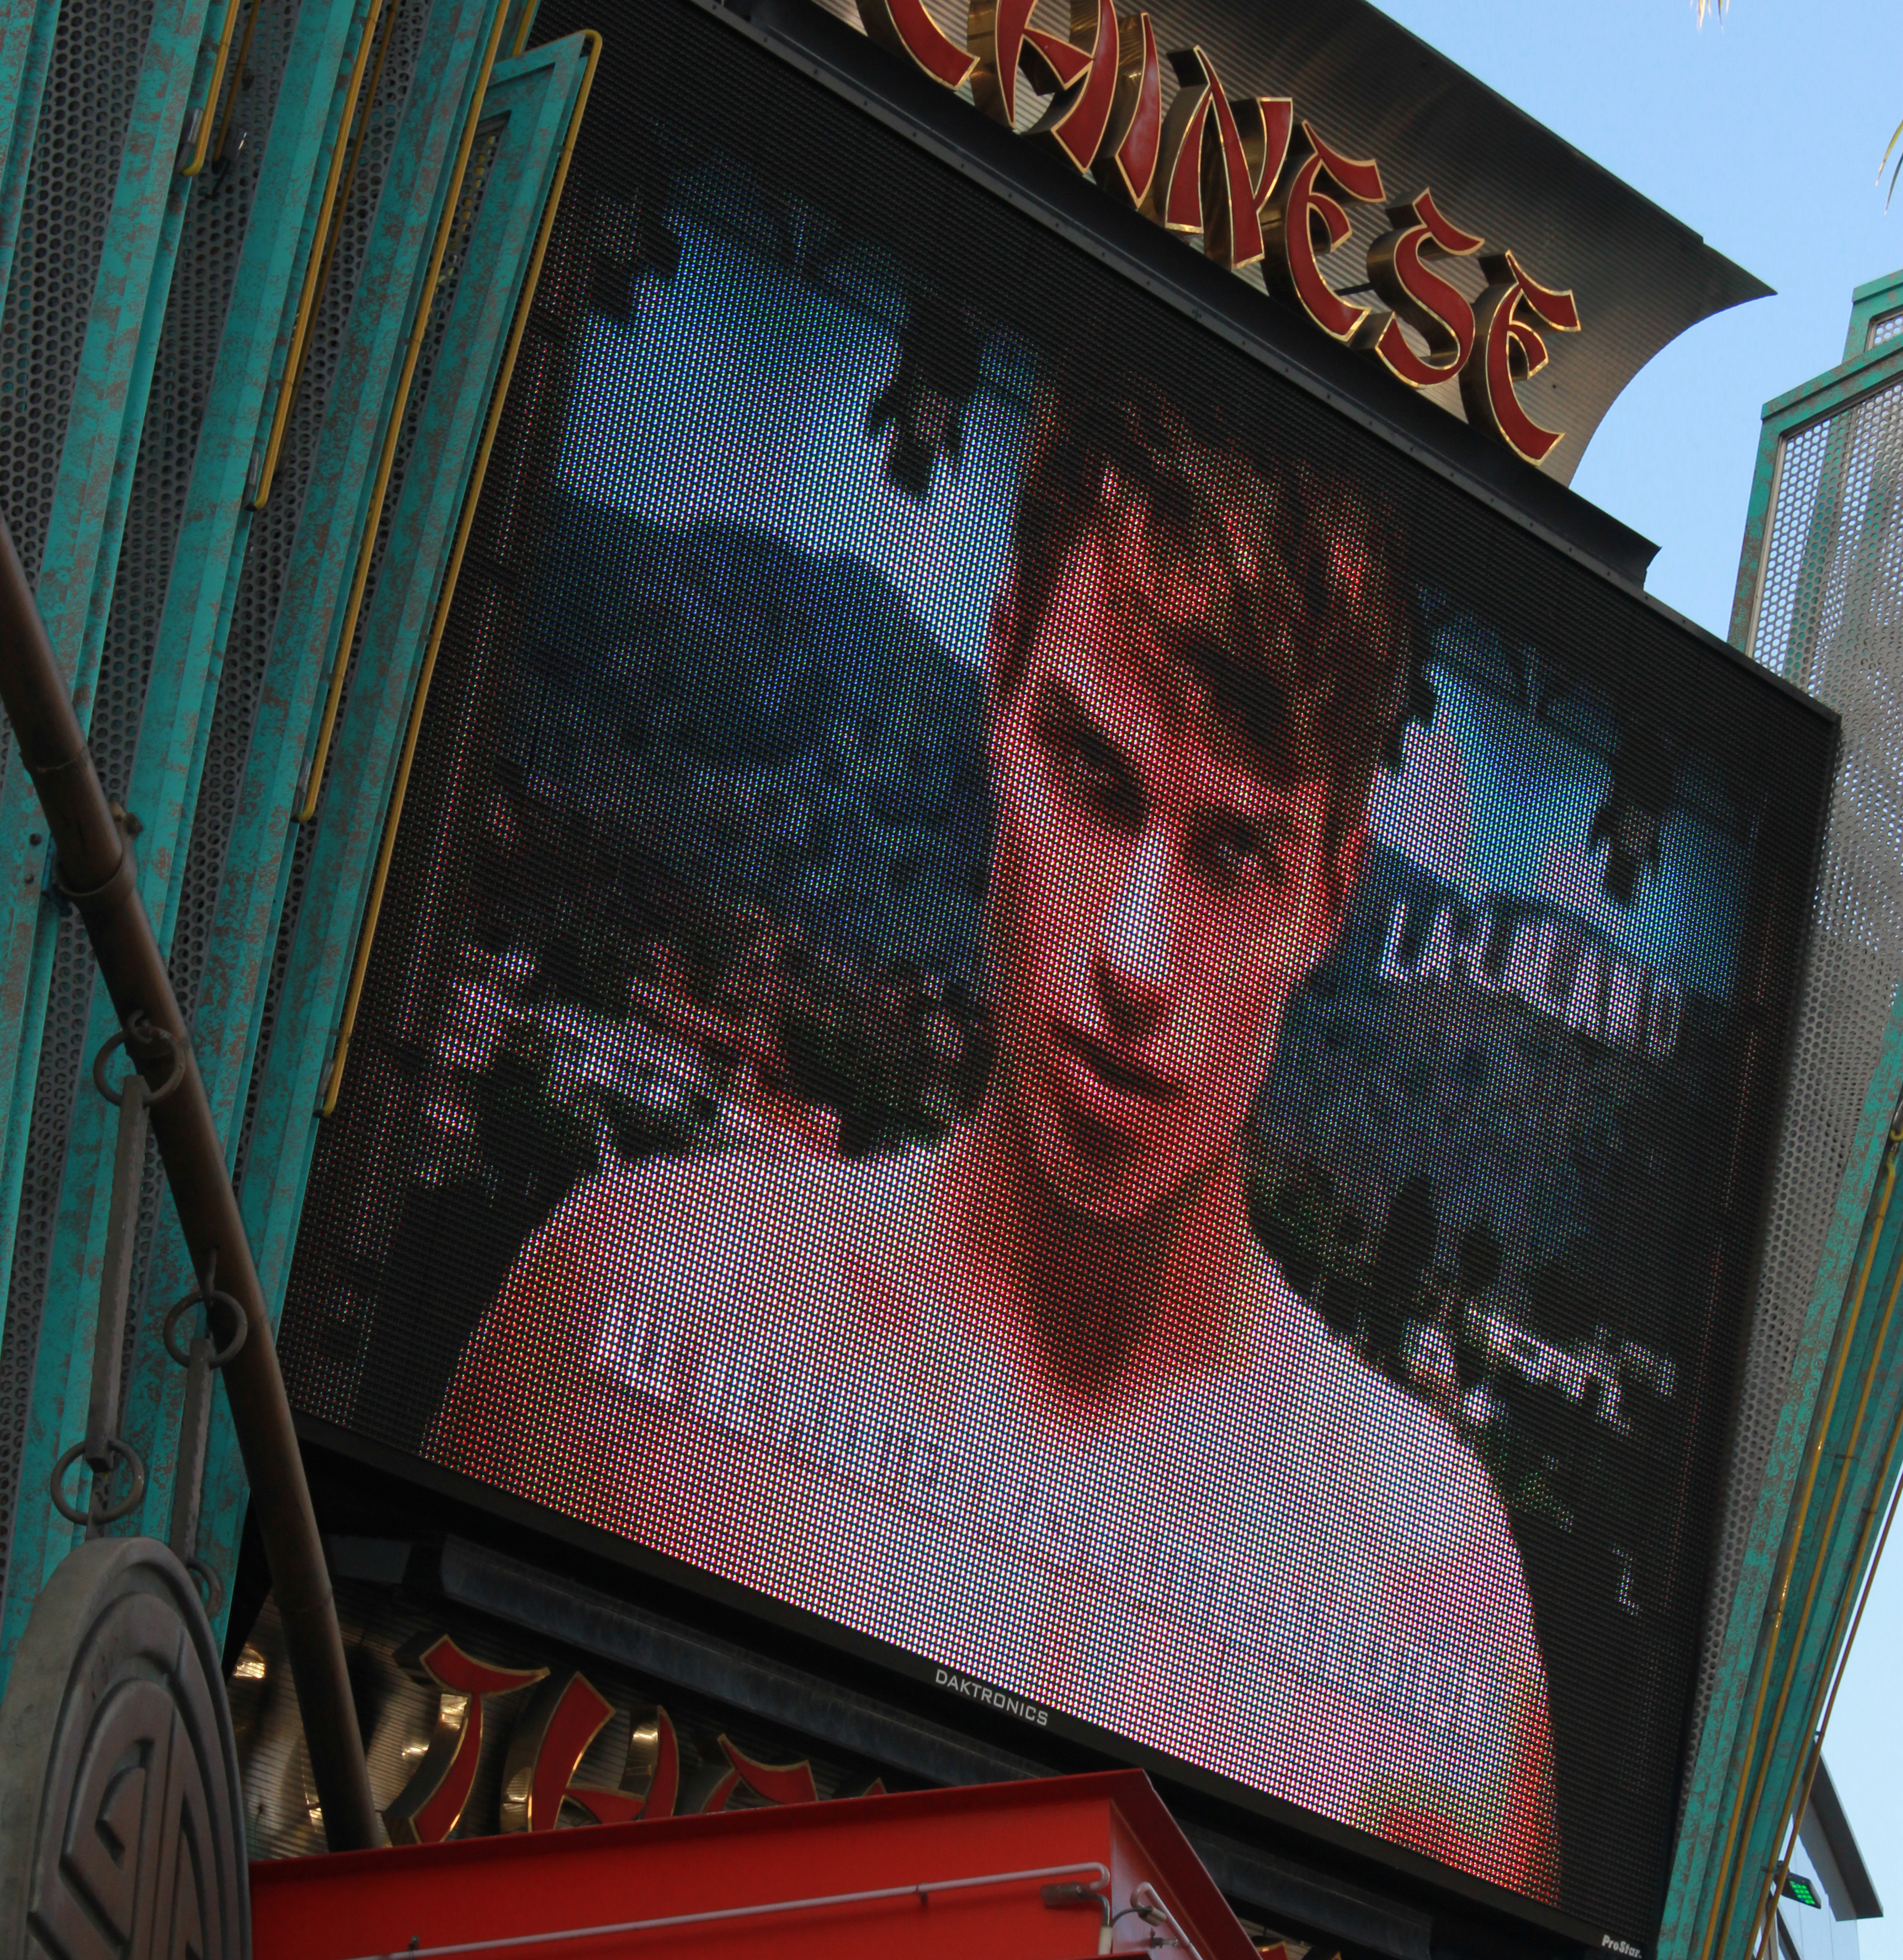 Opening of GOING DOWN IN LA-LA LAND at the Chinese Theaters in Los Angeles, May 2012.